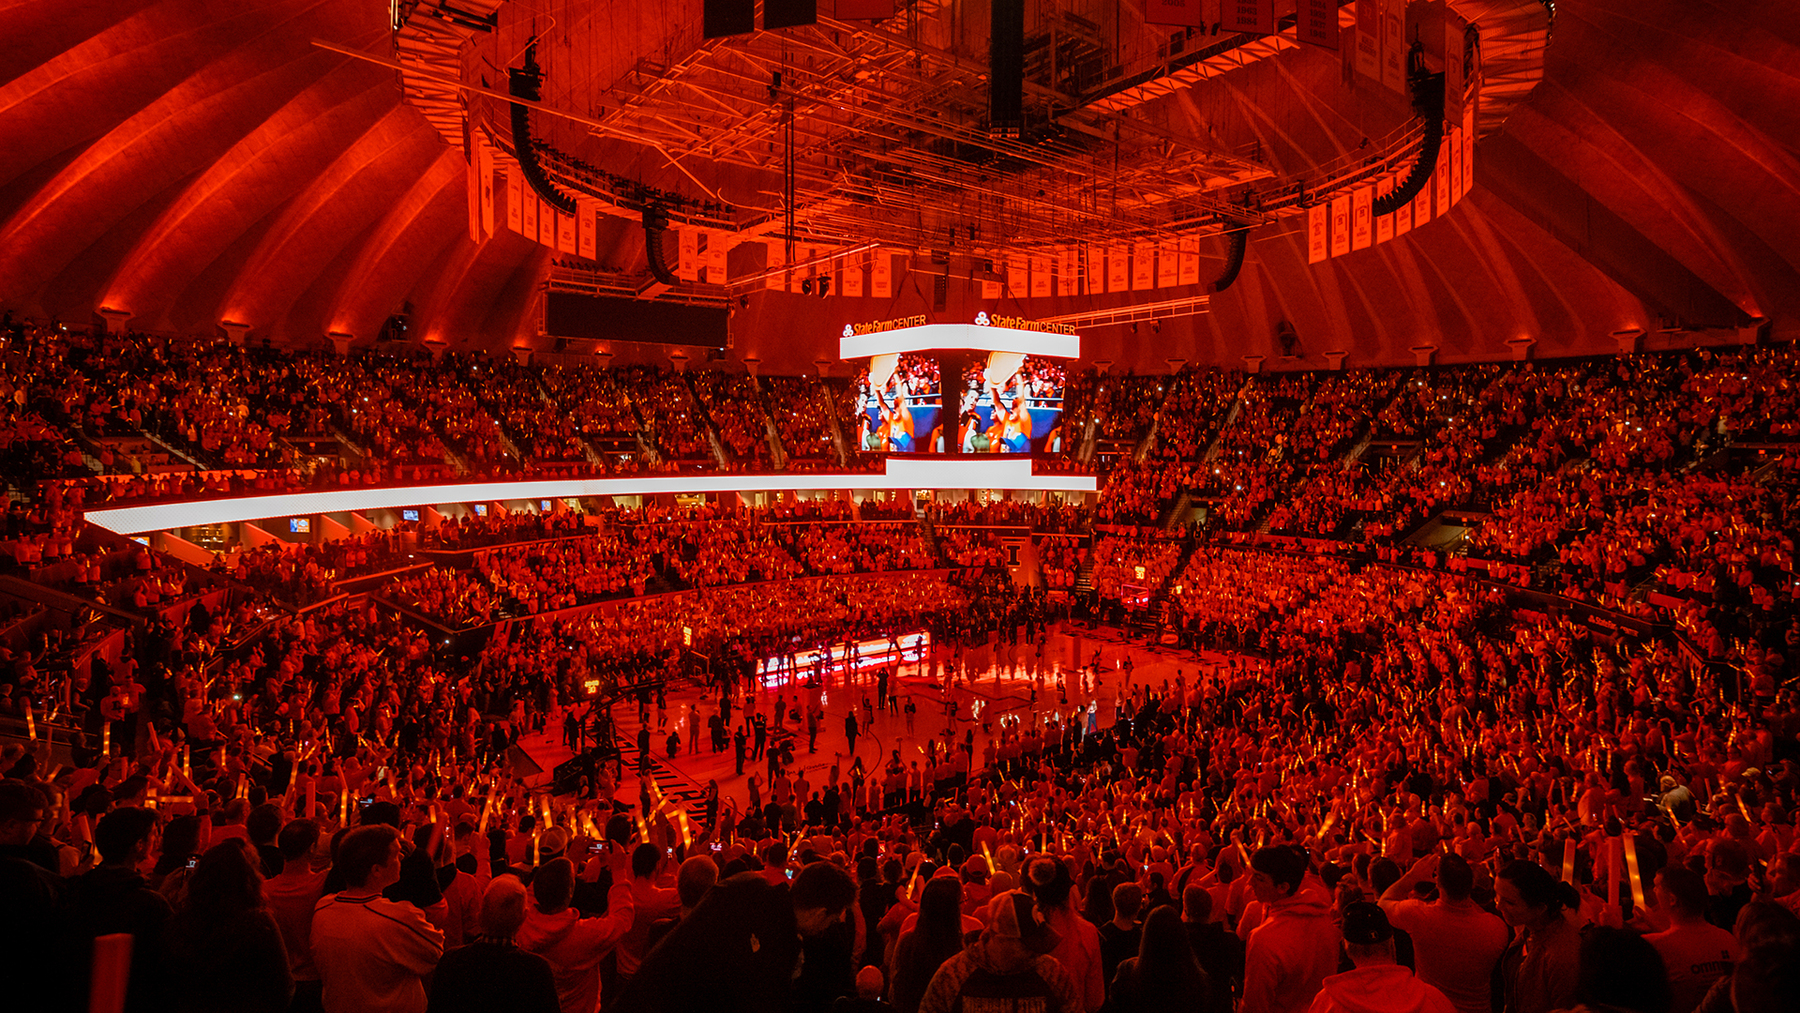 packed State Farm Center with sinopia color treatment